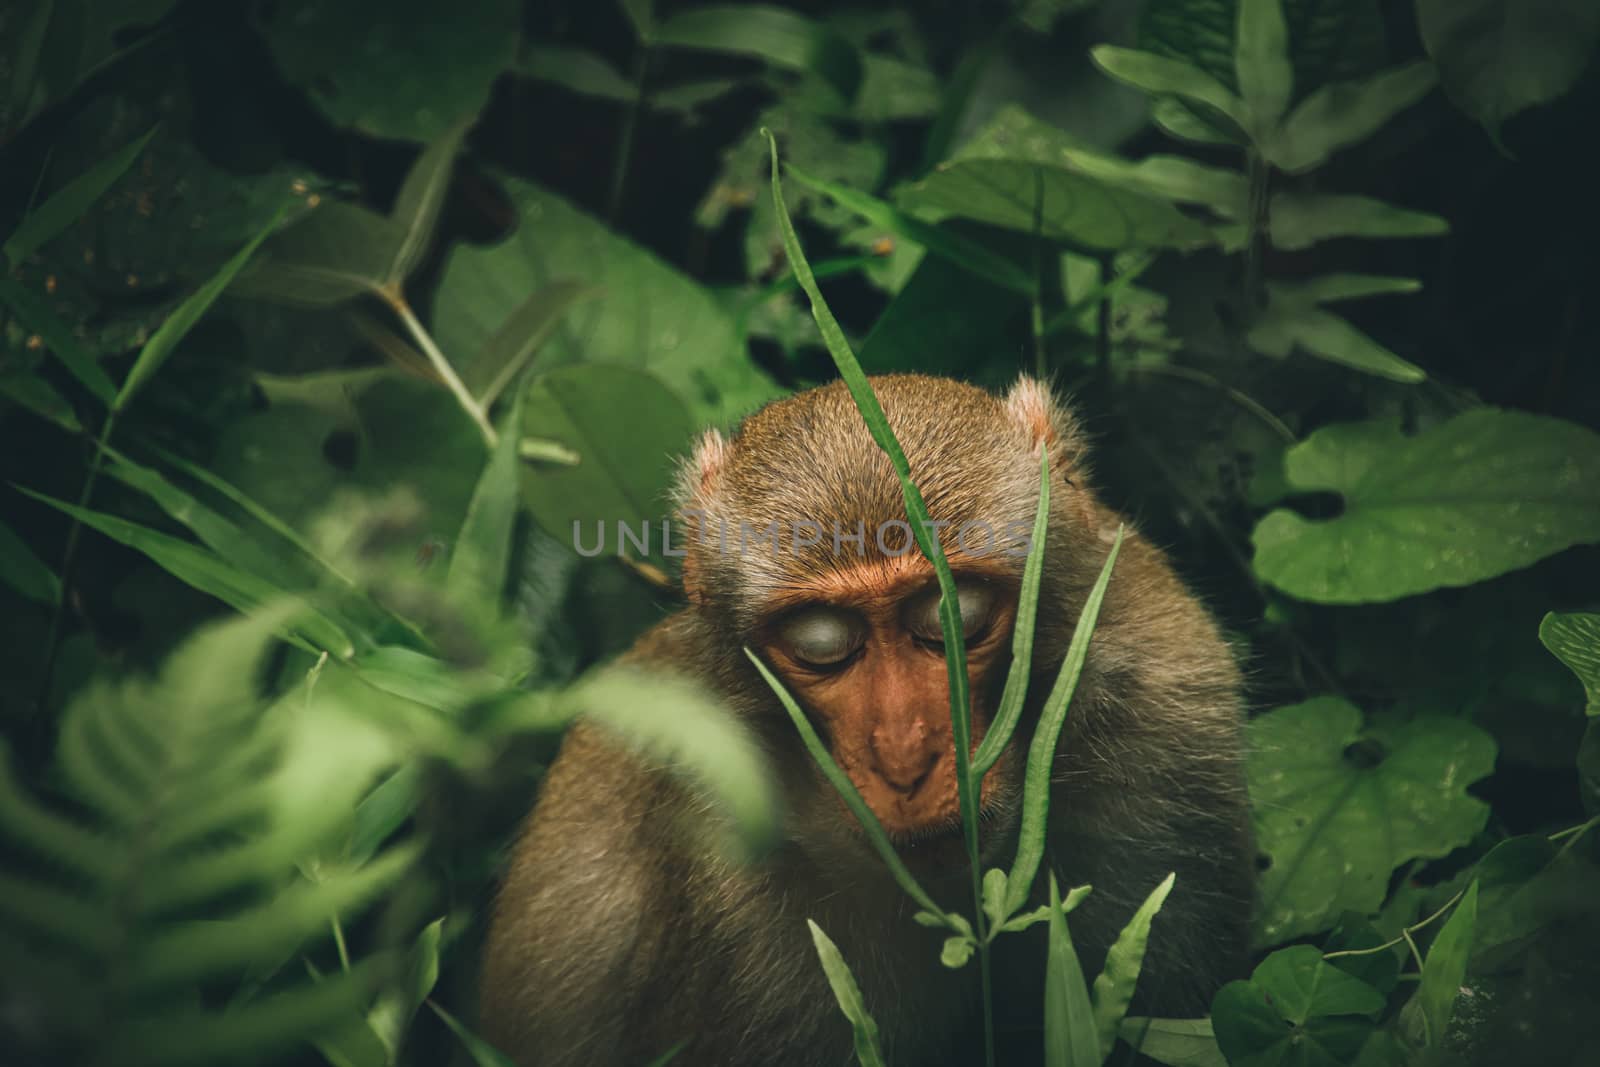 Northern pig-tailed macaque monkey by Sonnet15